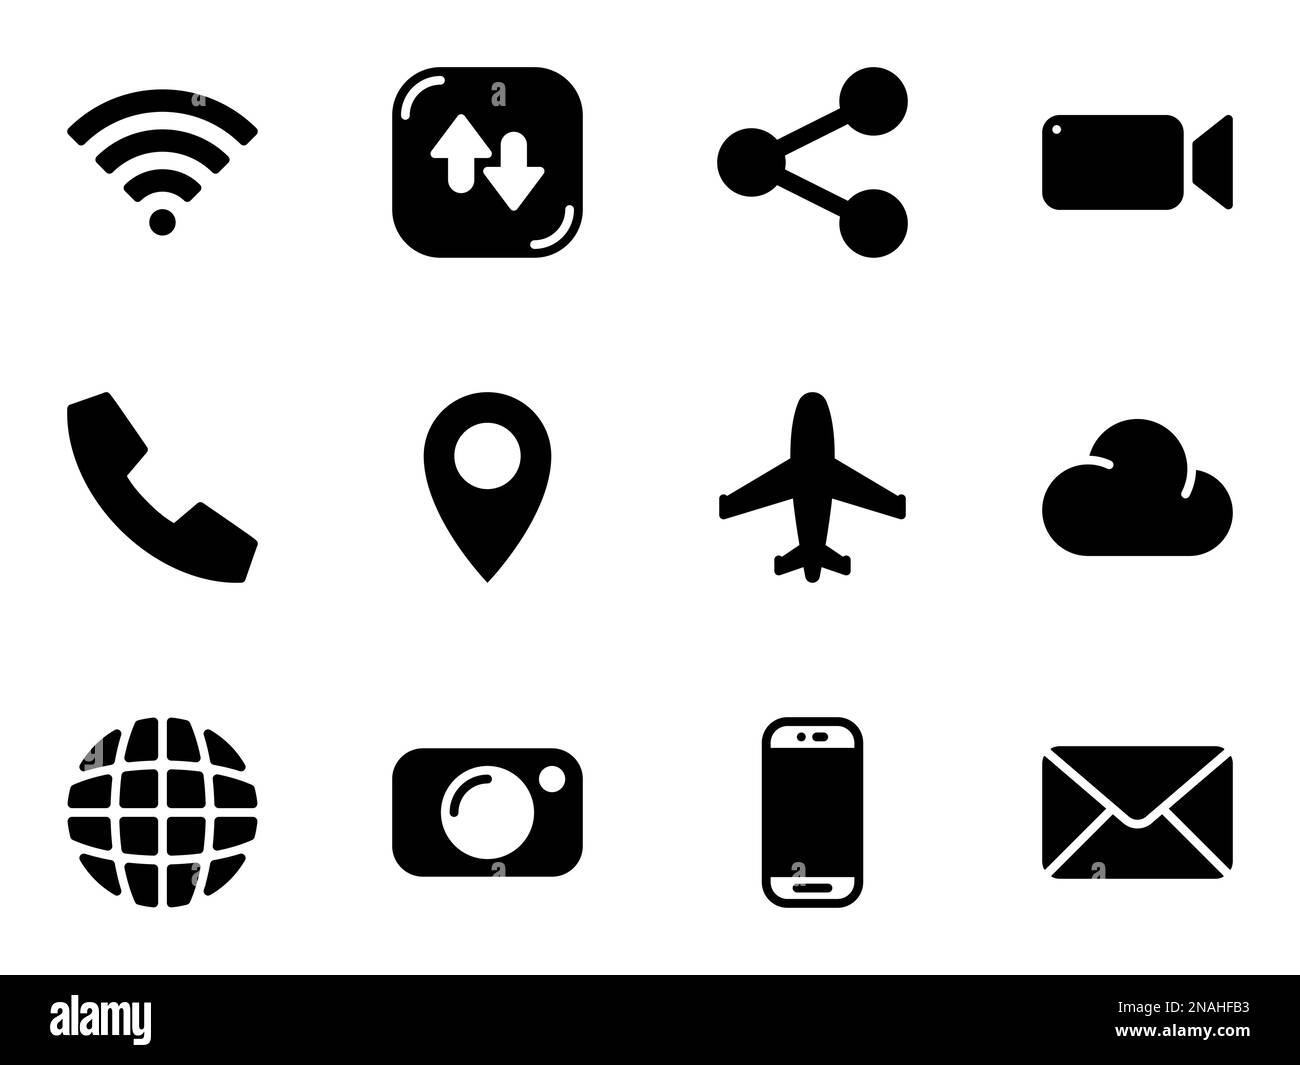 Simple vector icons. Flat illustration on a theme web icons for computer, phone, tablet, laptop Stock Vector